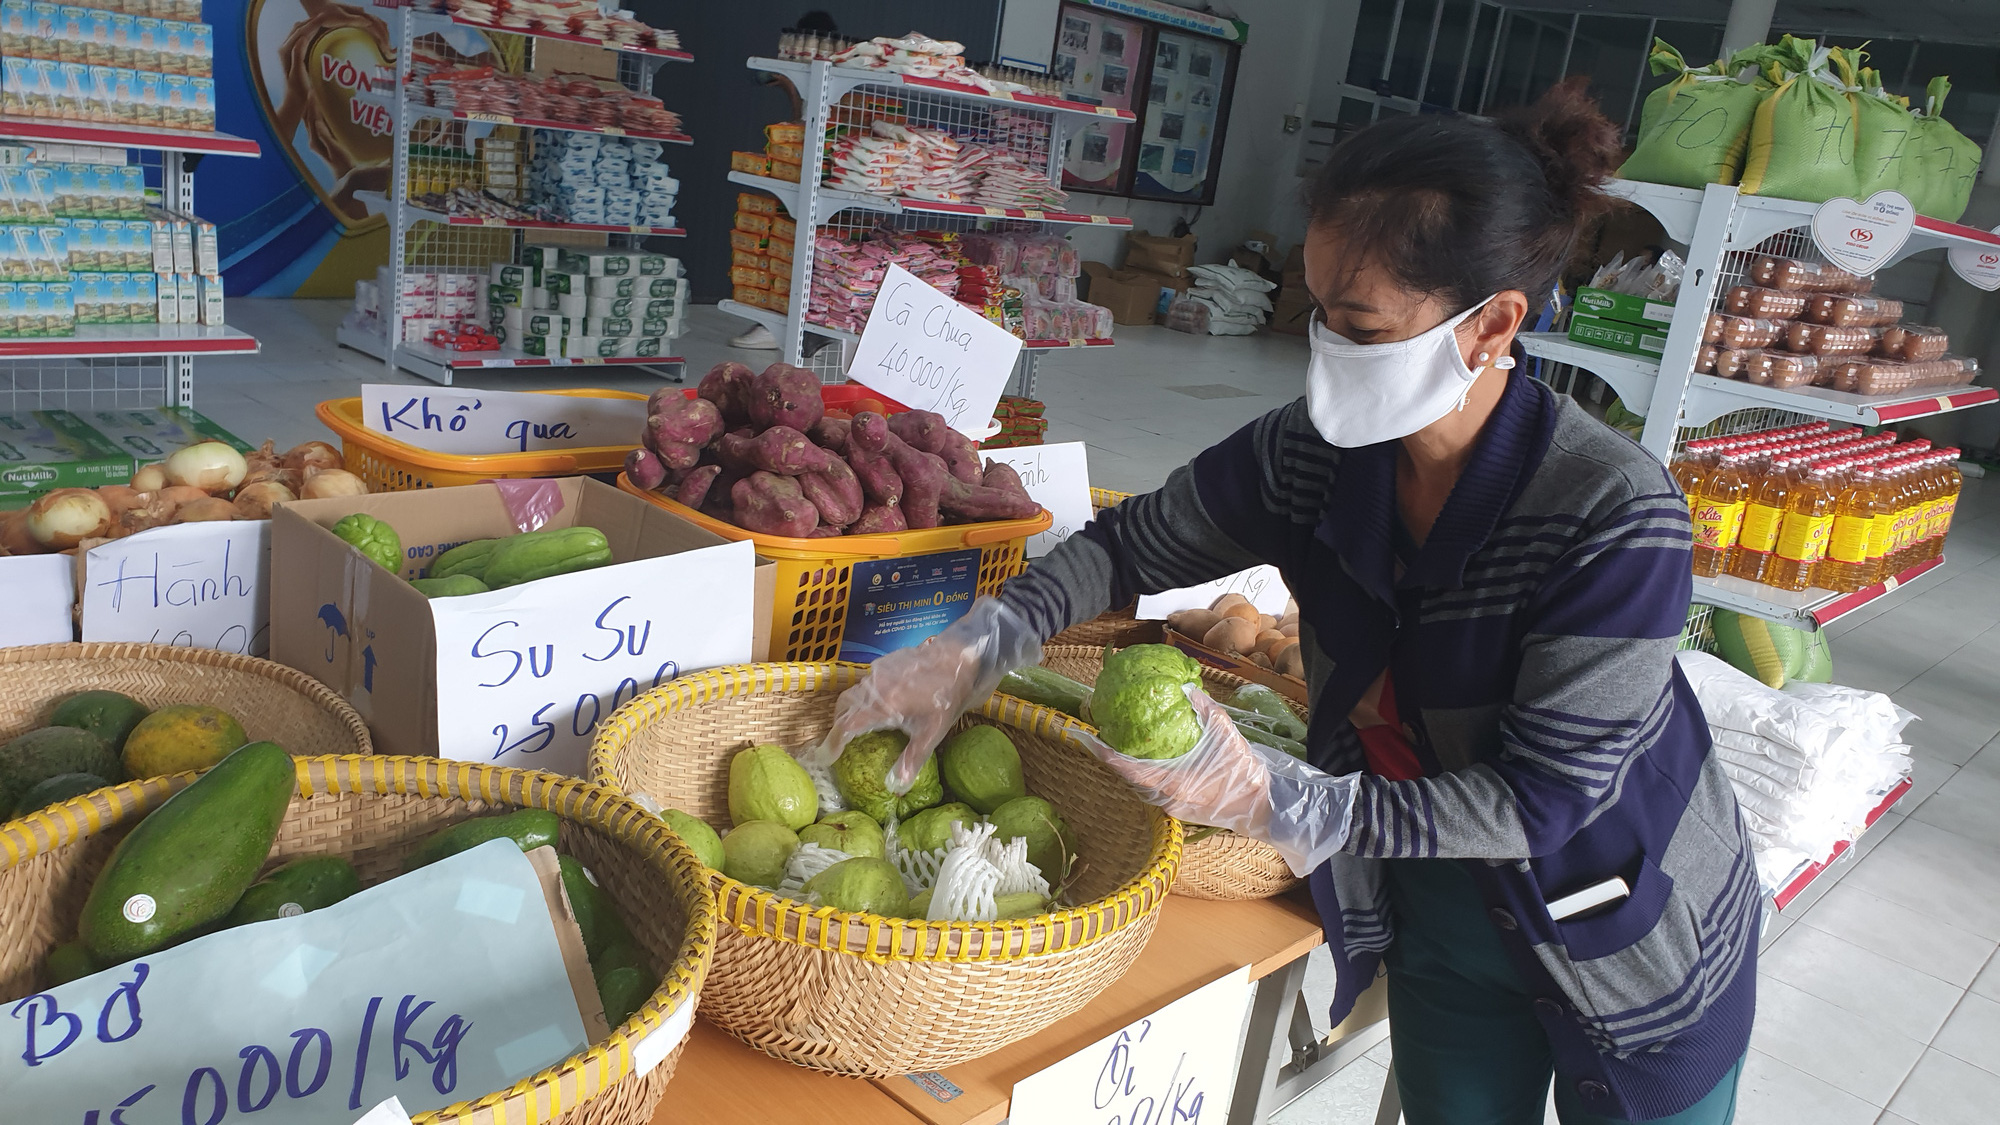 Free supermarkets help poor people survive COVID-19 pandemic in Ho Chi Minh City